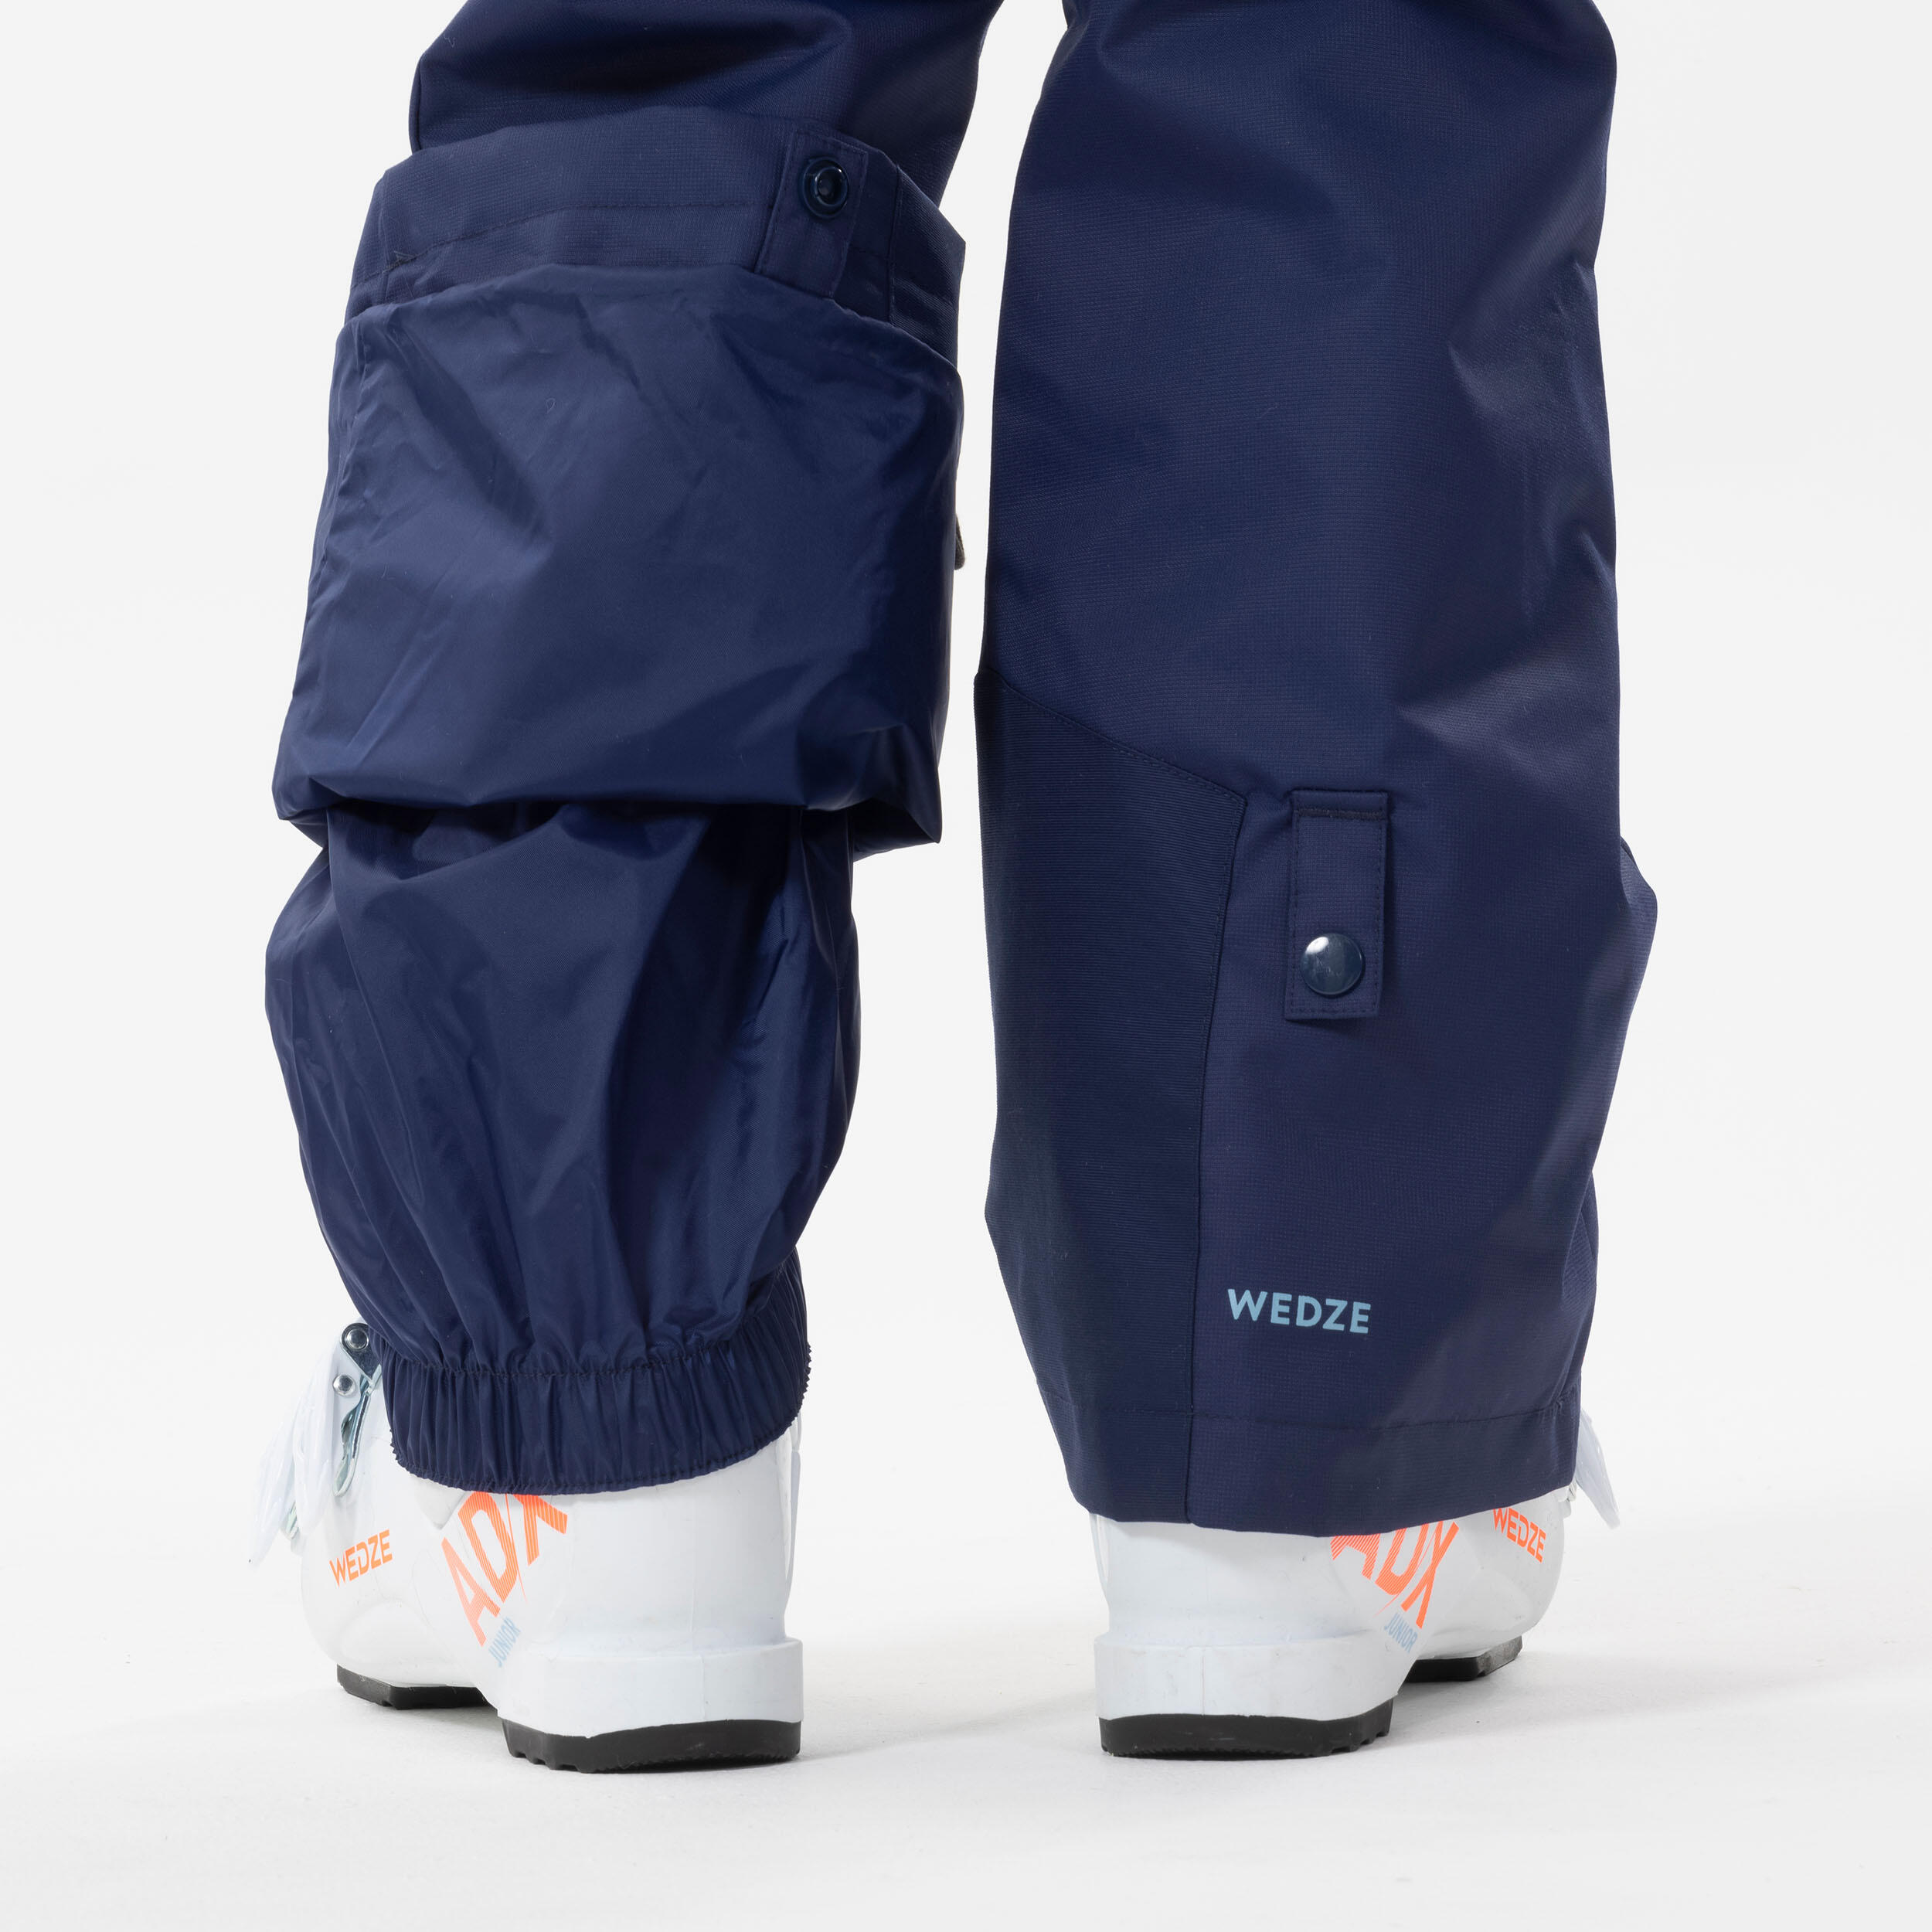 KIDS’ WARM AND WATERPROOF SKI SUIT 500 PINK AND BLUE 7/11